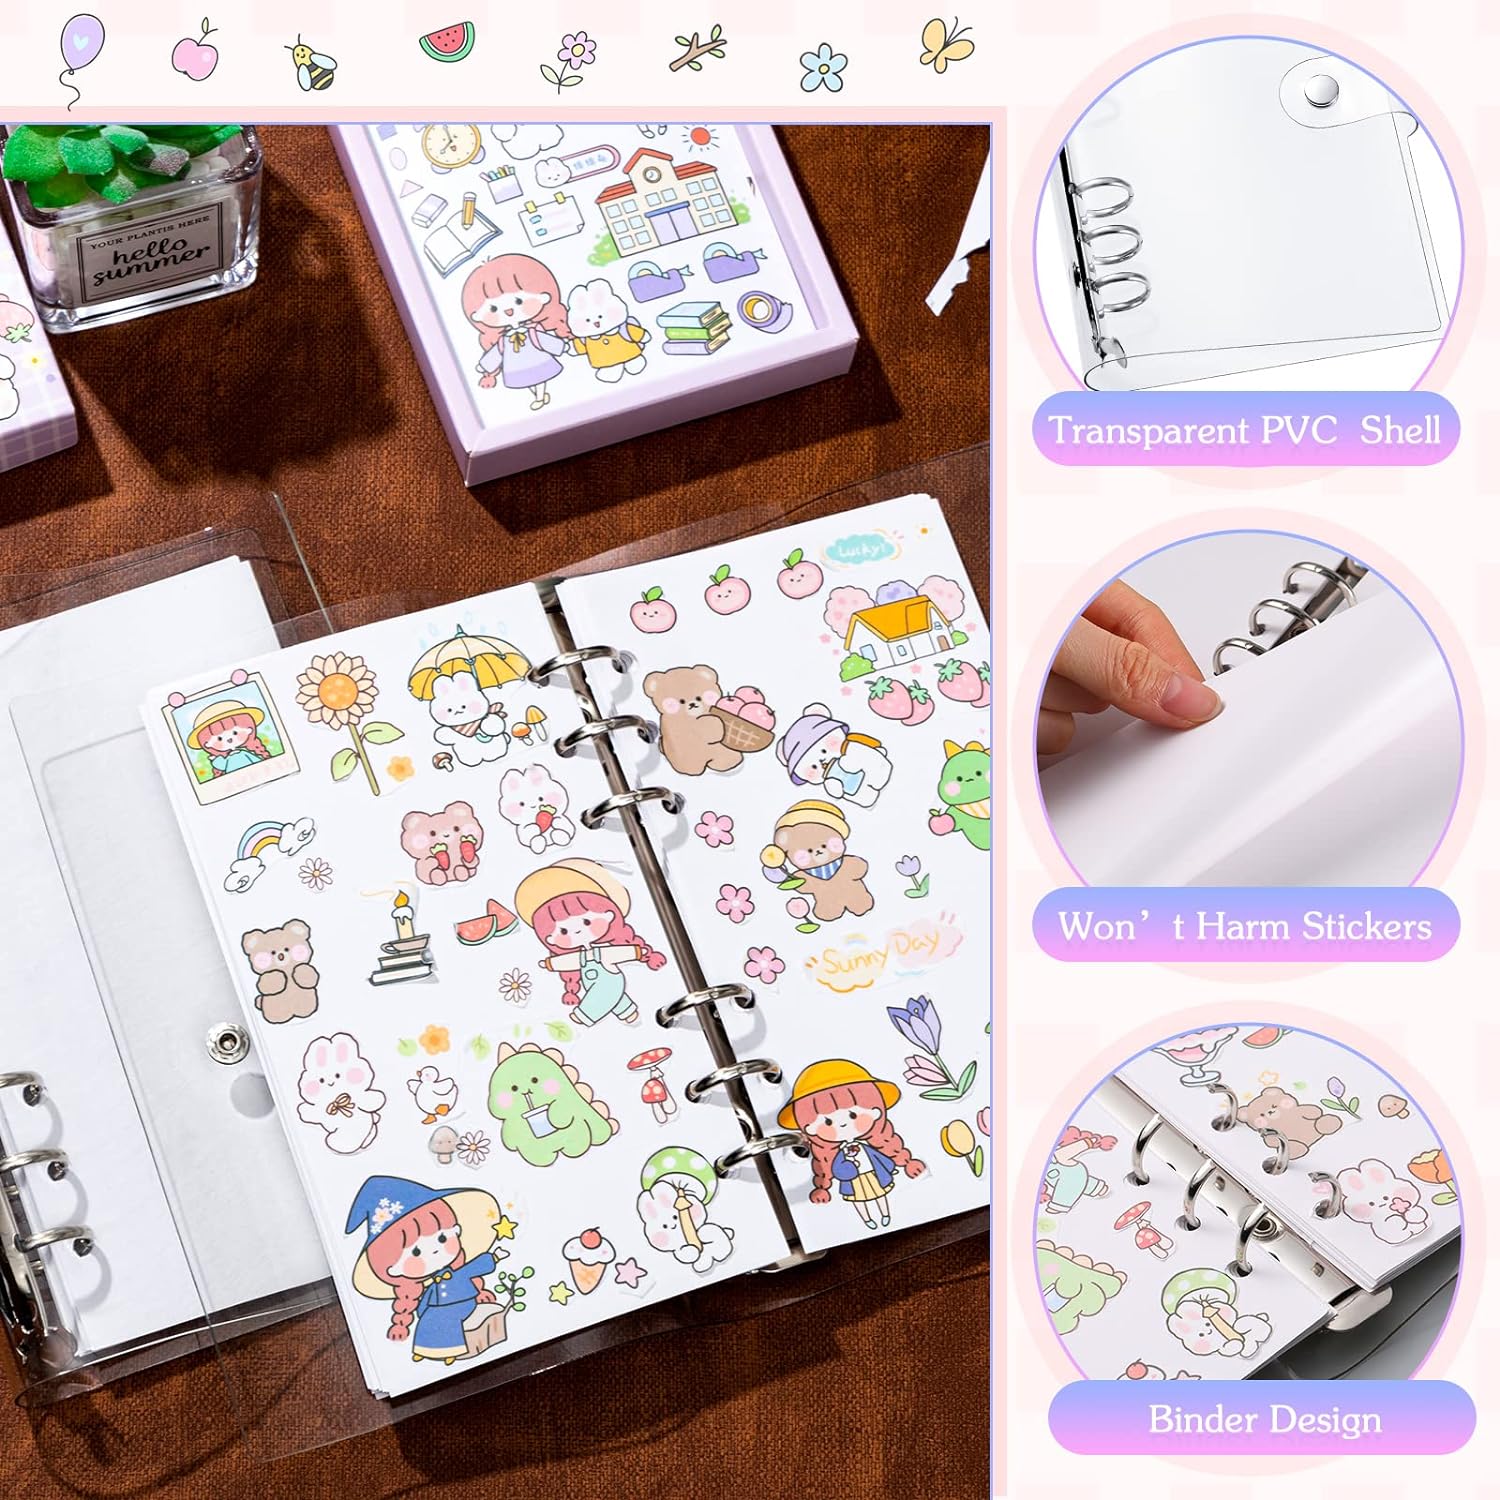 Kids Sticker Collecting Album Book with 40 Sheets PVC Shell A5/A6